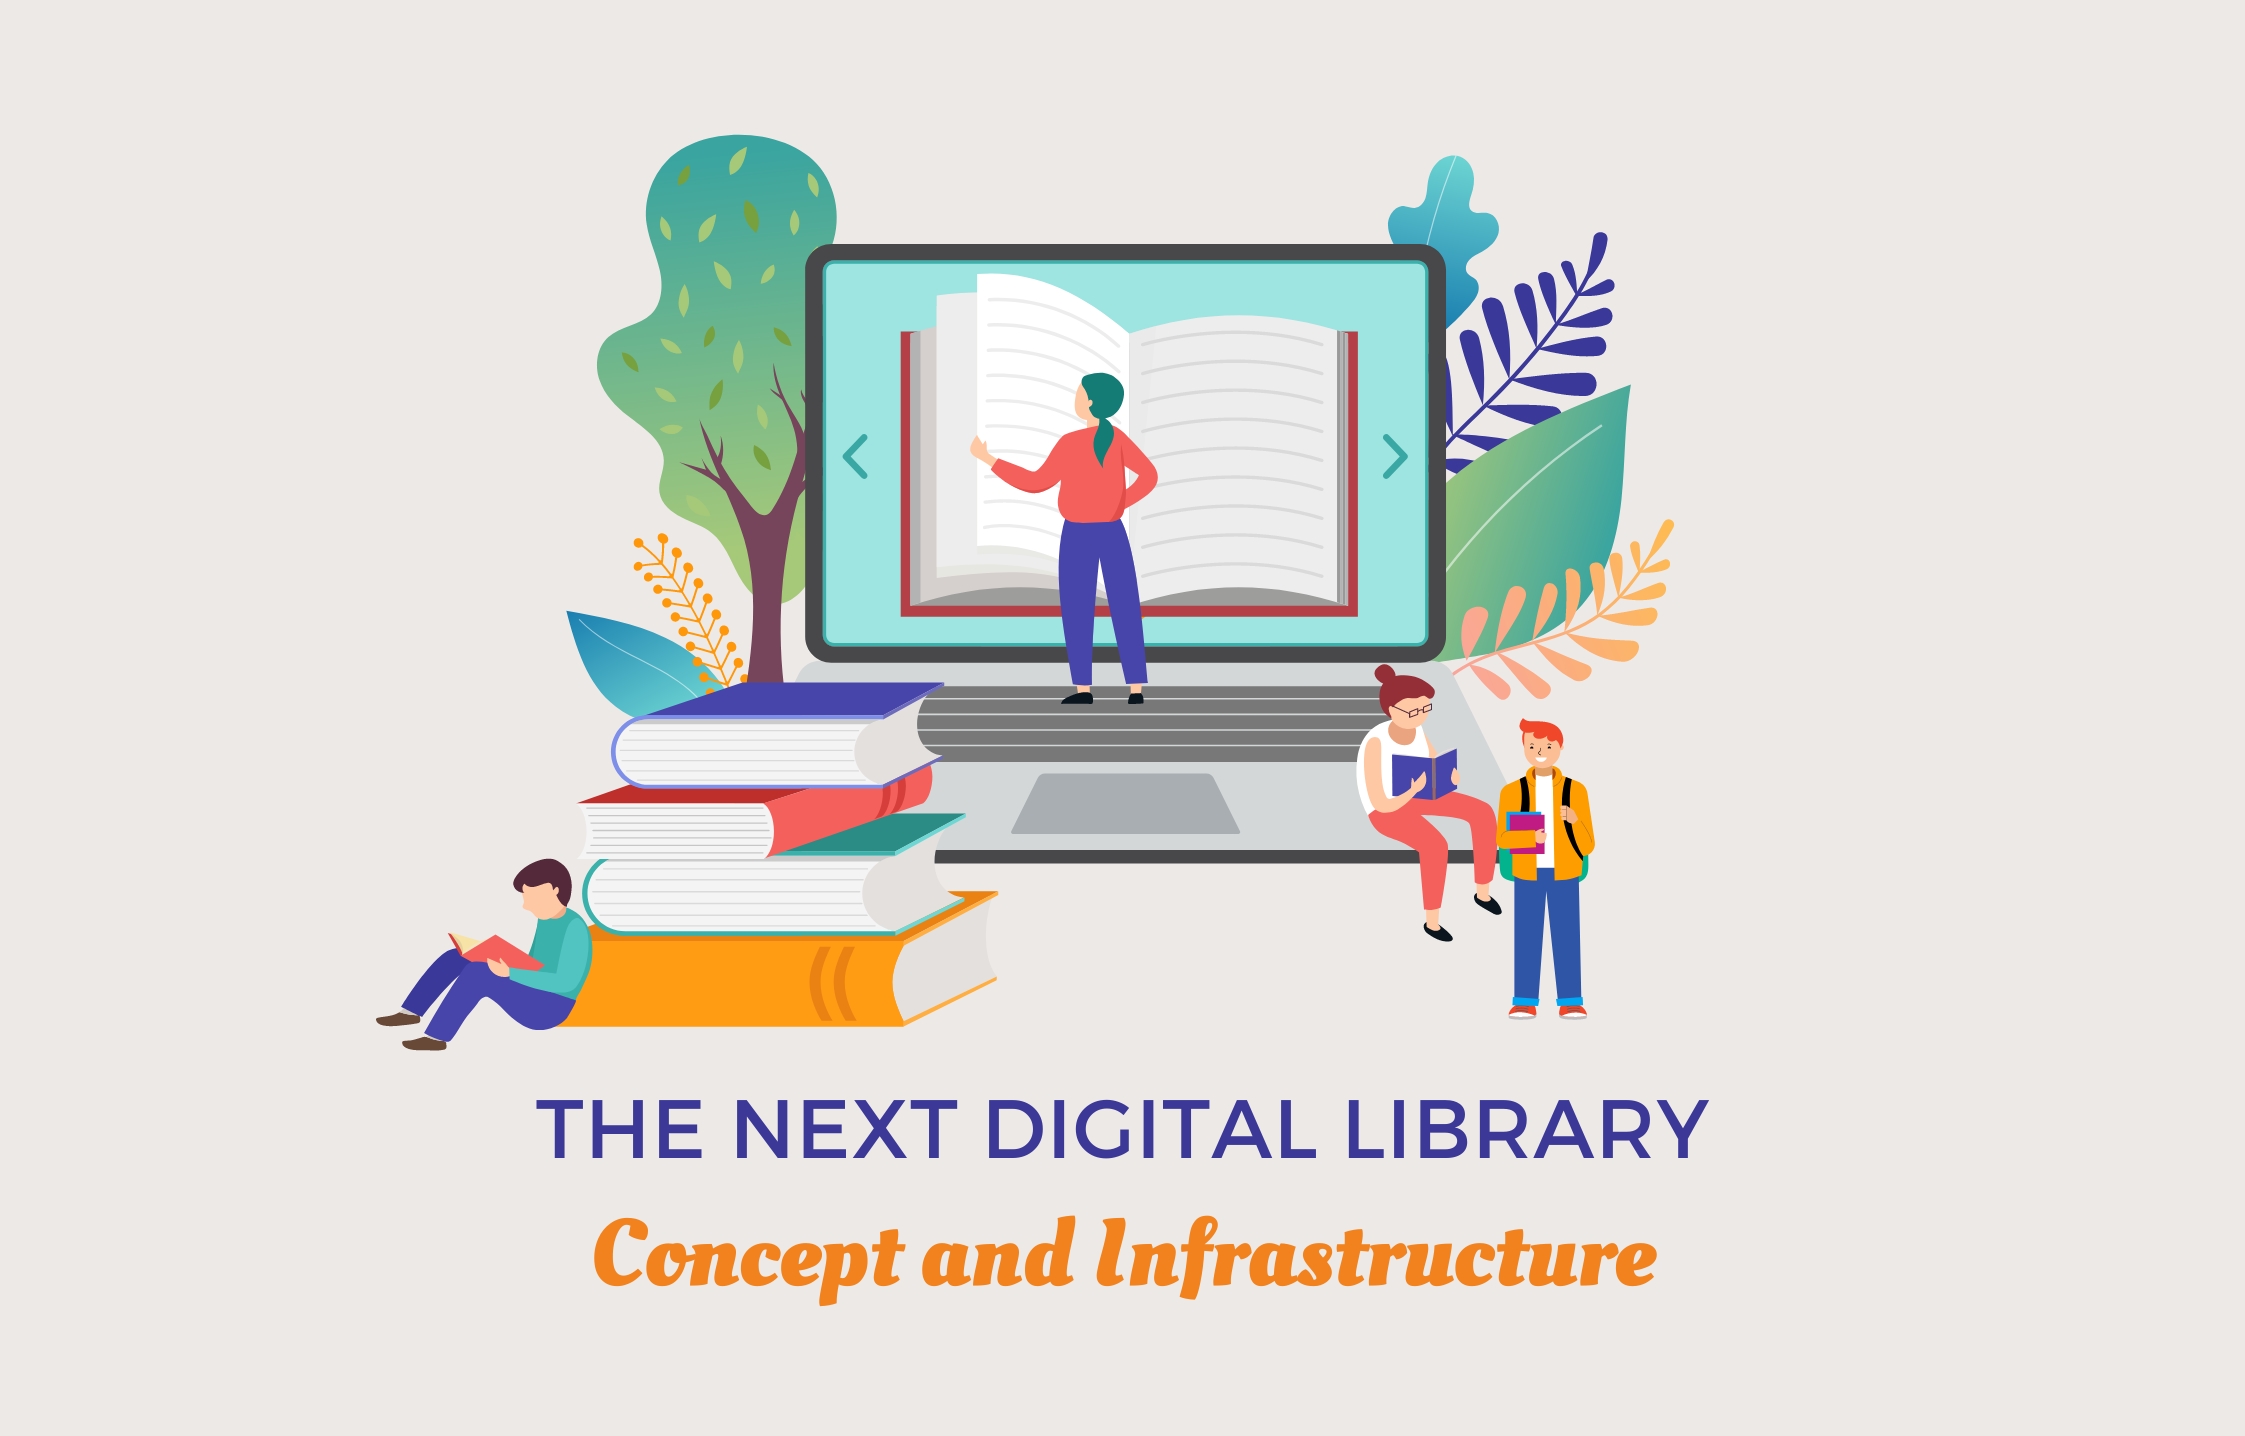 The Next Digital Library “CONCEPT AND INFRASTRUCTURE”